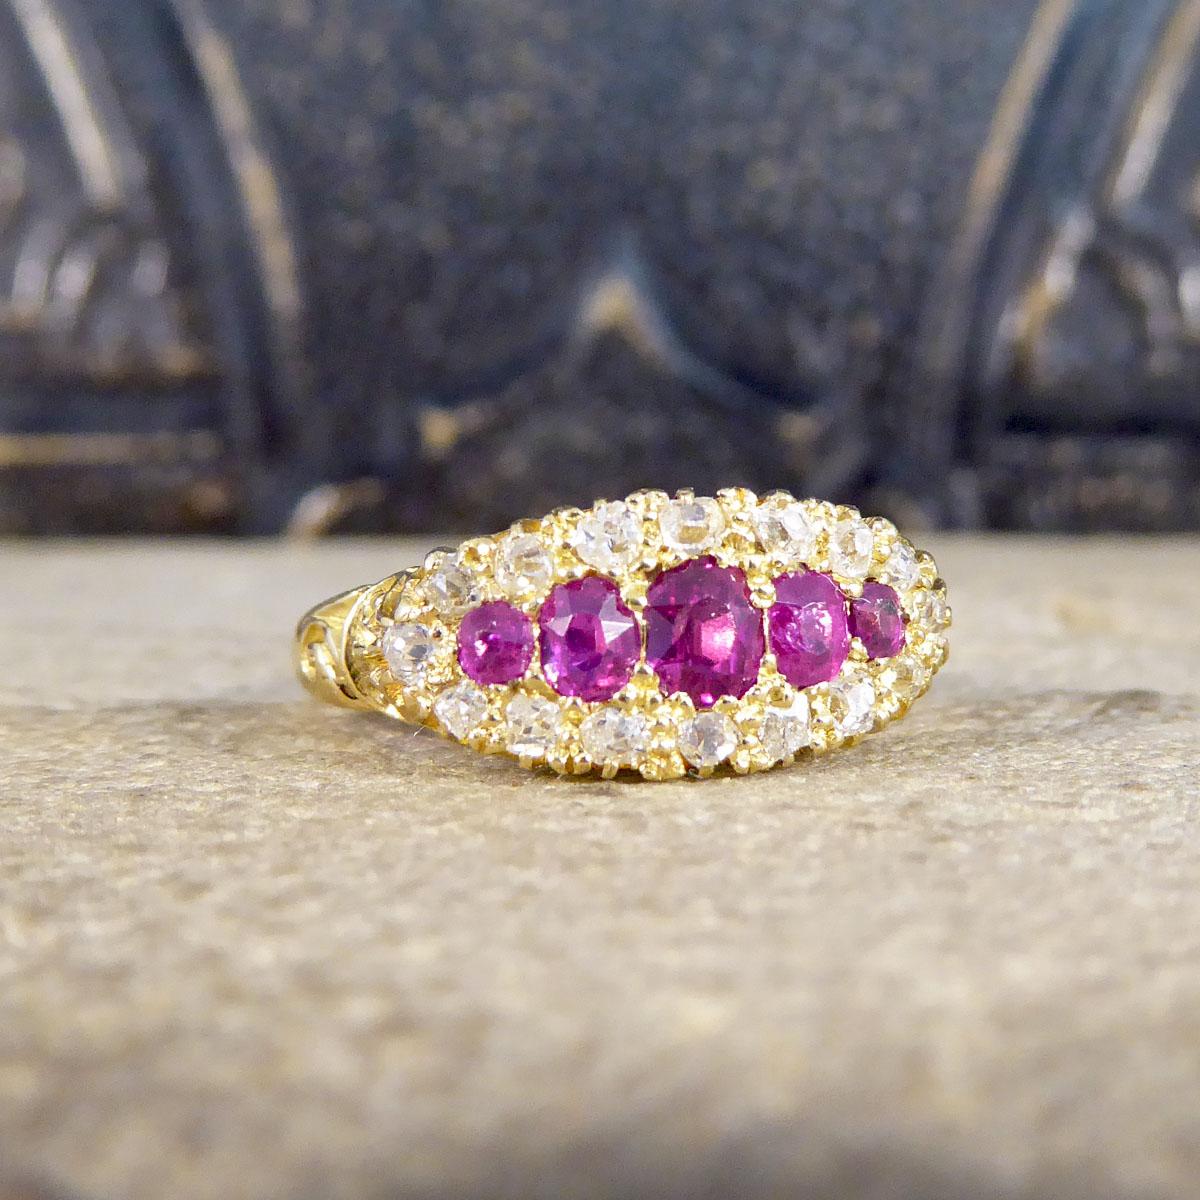 A true antique beauty, this gorgeous ring was hand crafted in the Late Victorian era, showing such quality craftsmanship and stones used. This ring features five bright and beautiful Rubies with a cluster of Rose cut Diamonds in claw settings